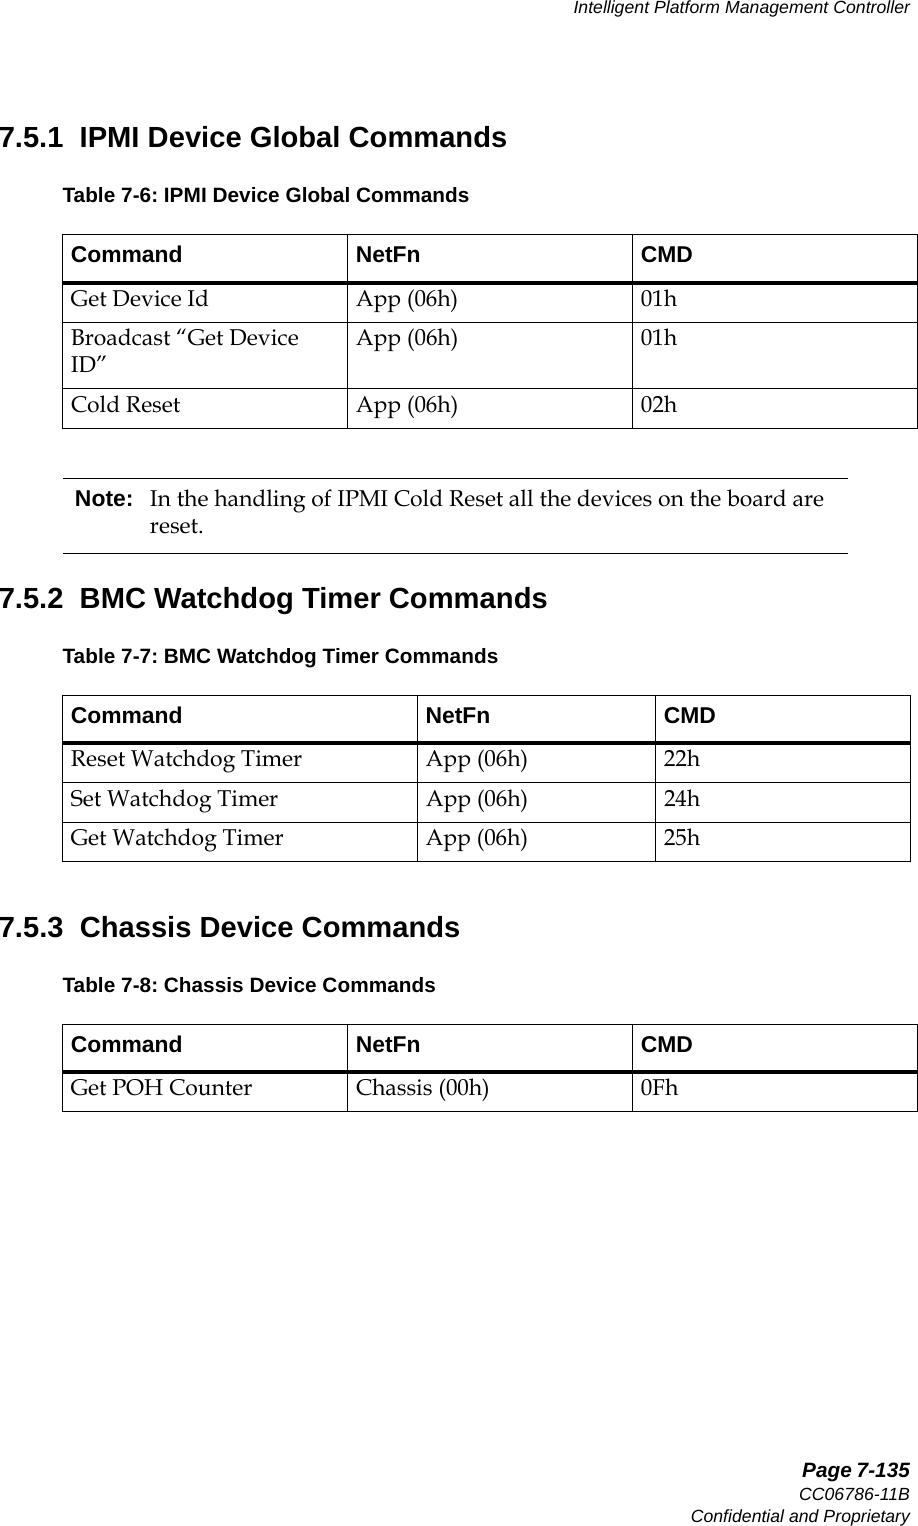   Page 7-135CC06786-11BConfidential and ProprietaryIntelligent Platform Management Controller14ABABPreliminary7.5.1  IPMI Device Global Commands7.5.2  BMC Watchdog Timer Commands7.5.3  Chassis Device CommandsTable 7-6: IPMI Device Global CommandsCommand NetFn CMDGet Device Id App (06h) 01hBroadcast “Get Device ID”App (06h) 01hCold Reset App (06h) 02hNote: In the handling of IPMI Cold Reset all the devices on the board are reset.Table 7-7: BMC Watchdog Timer CommandsCommand NetFn CMDReset Watchdog Timer App (06h) 22hSet Watchdog Timer App (06h) 24hGet Watchdog Timer App (06h) 25hTable 7-8: Chassis Device CommandsCommand NetFn CMDGet POH Counter Chassis (00h) 0Fh